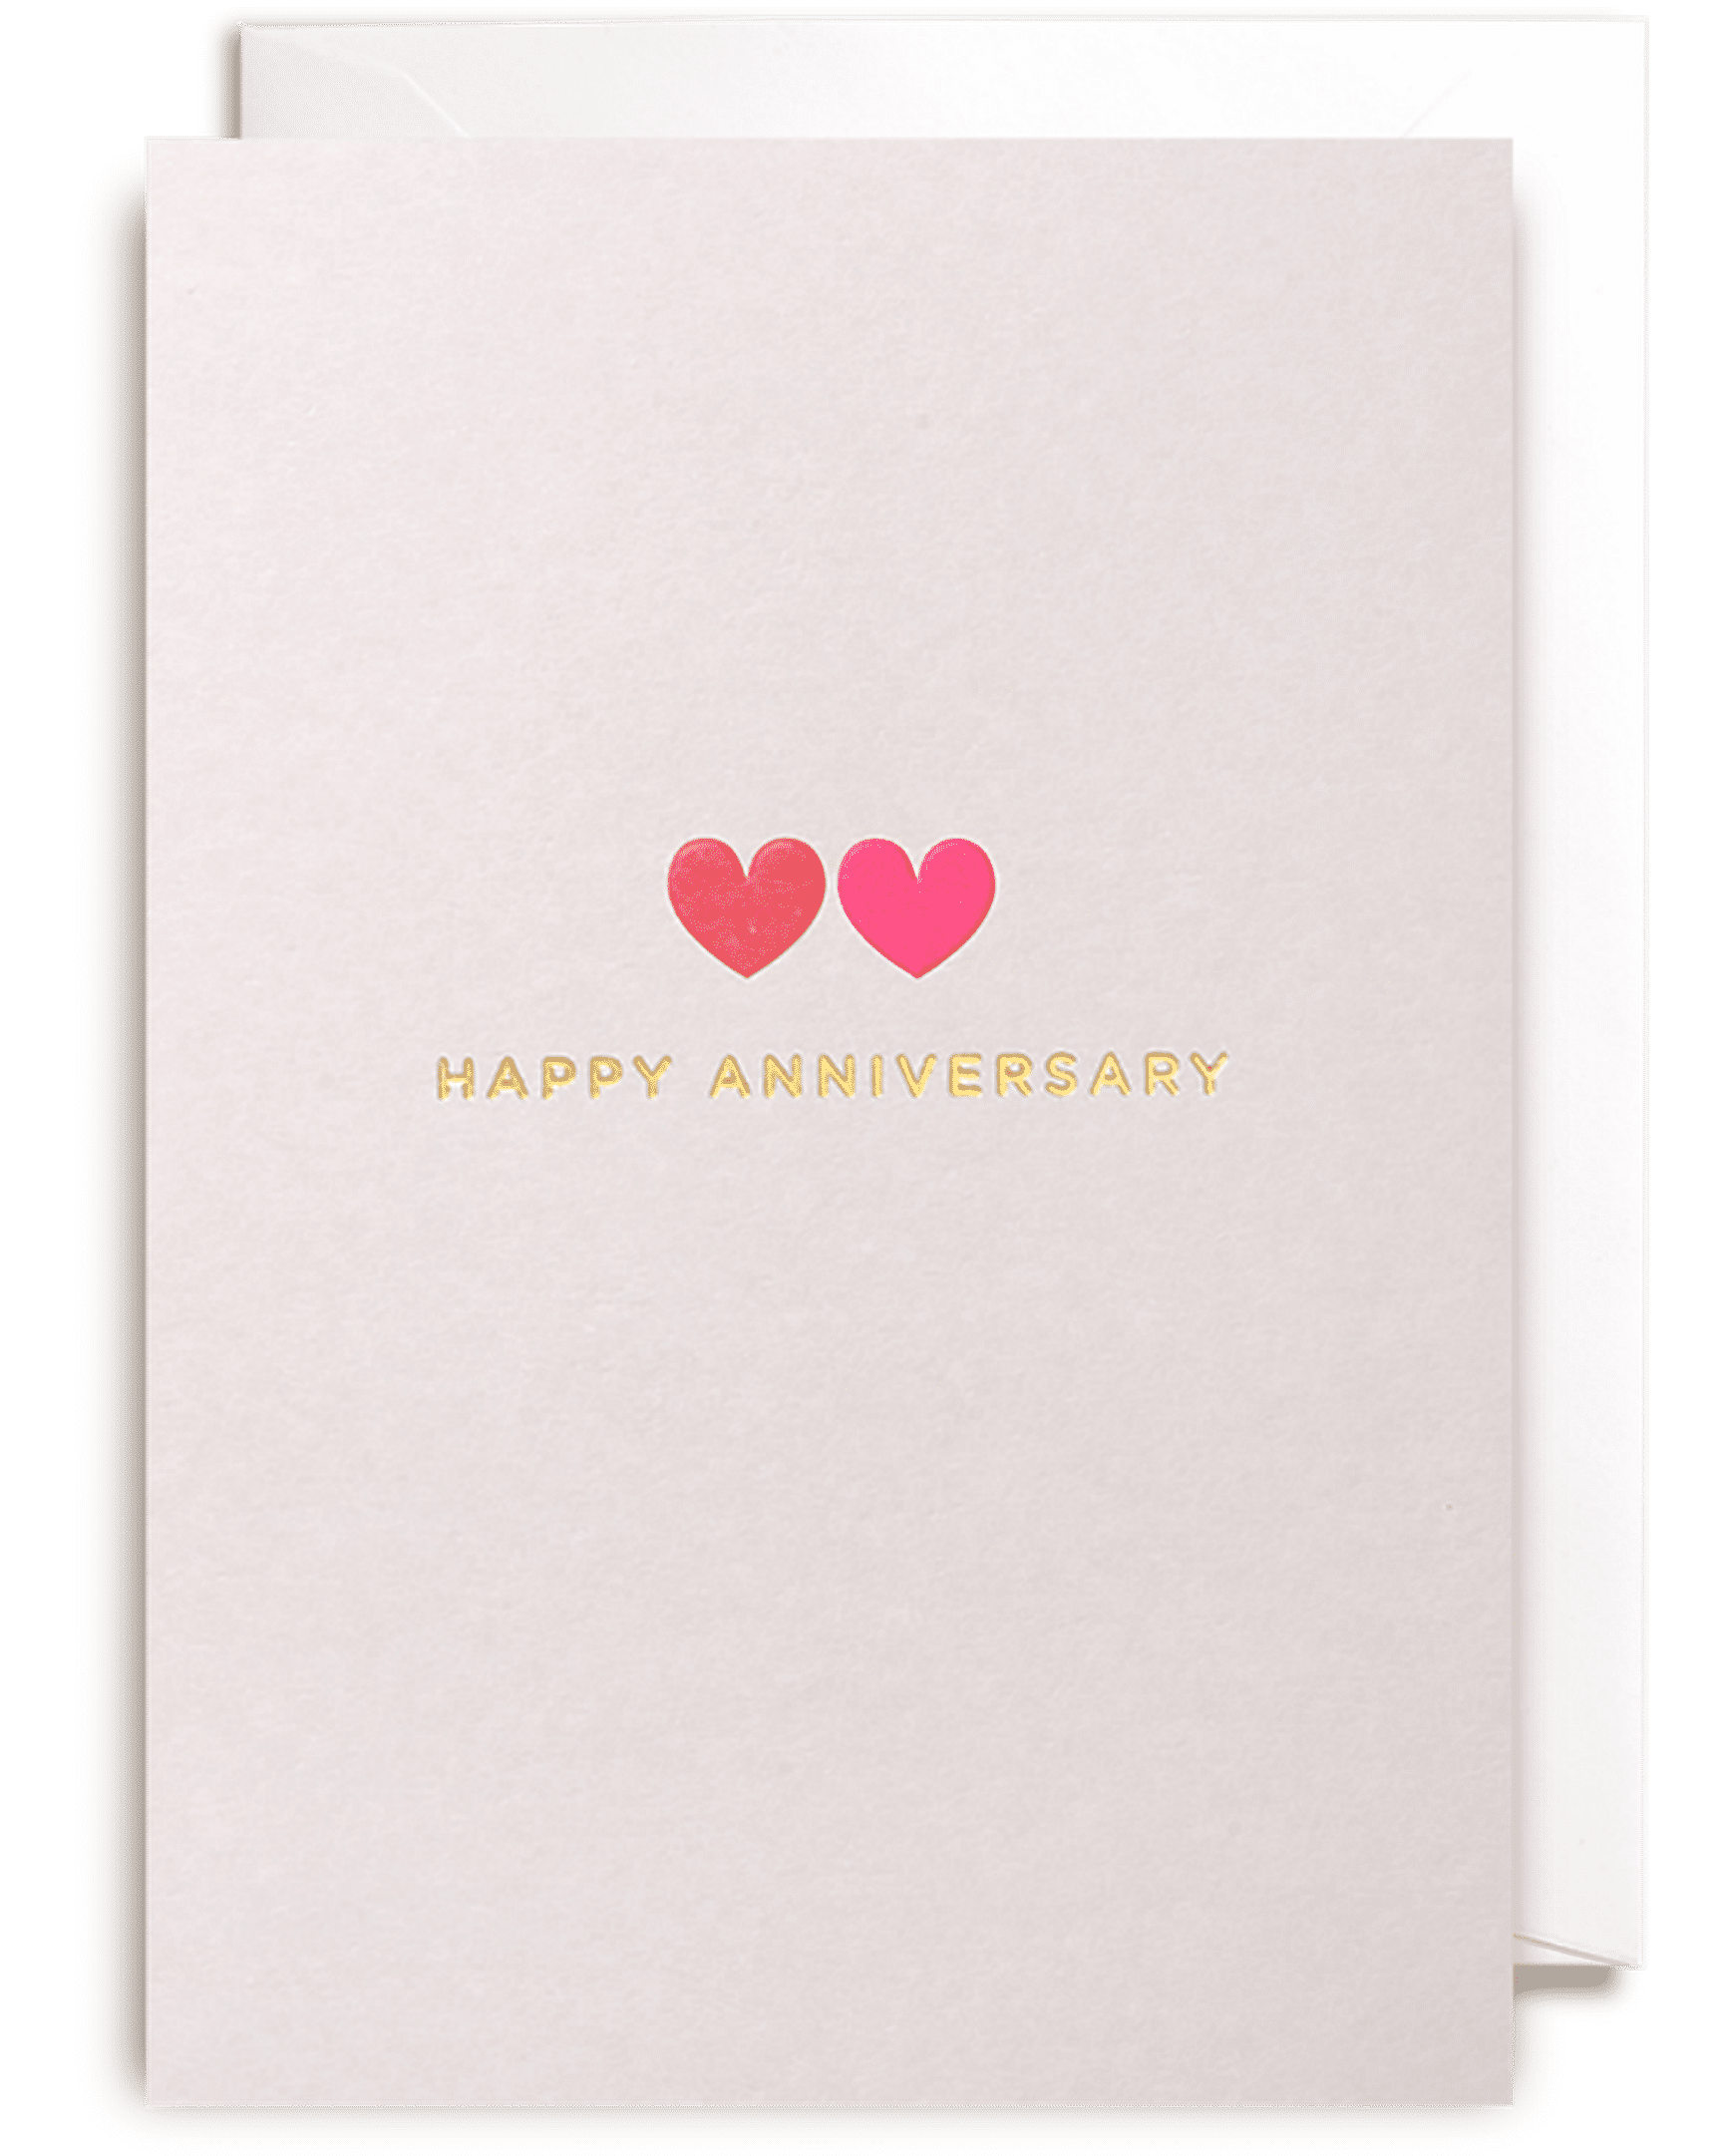 Greetings Cards | Birthday Cards & Thank You Cards Online | Oliver Bonas